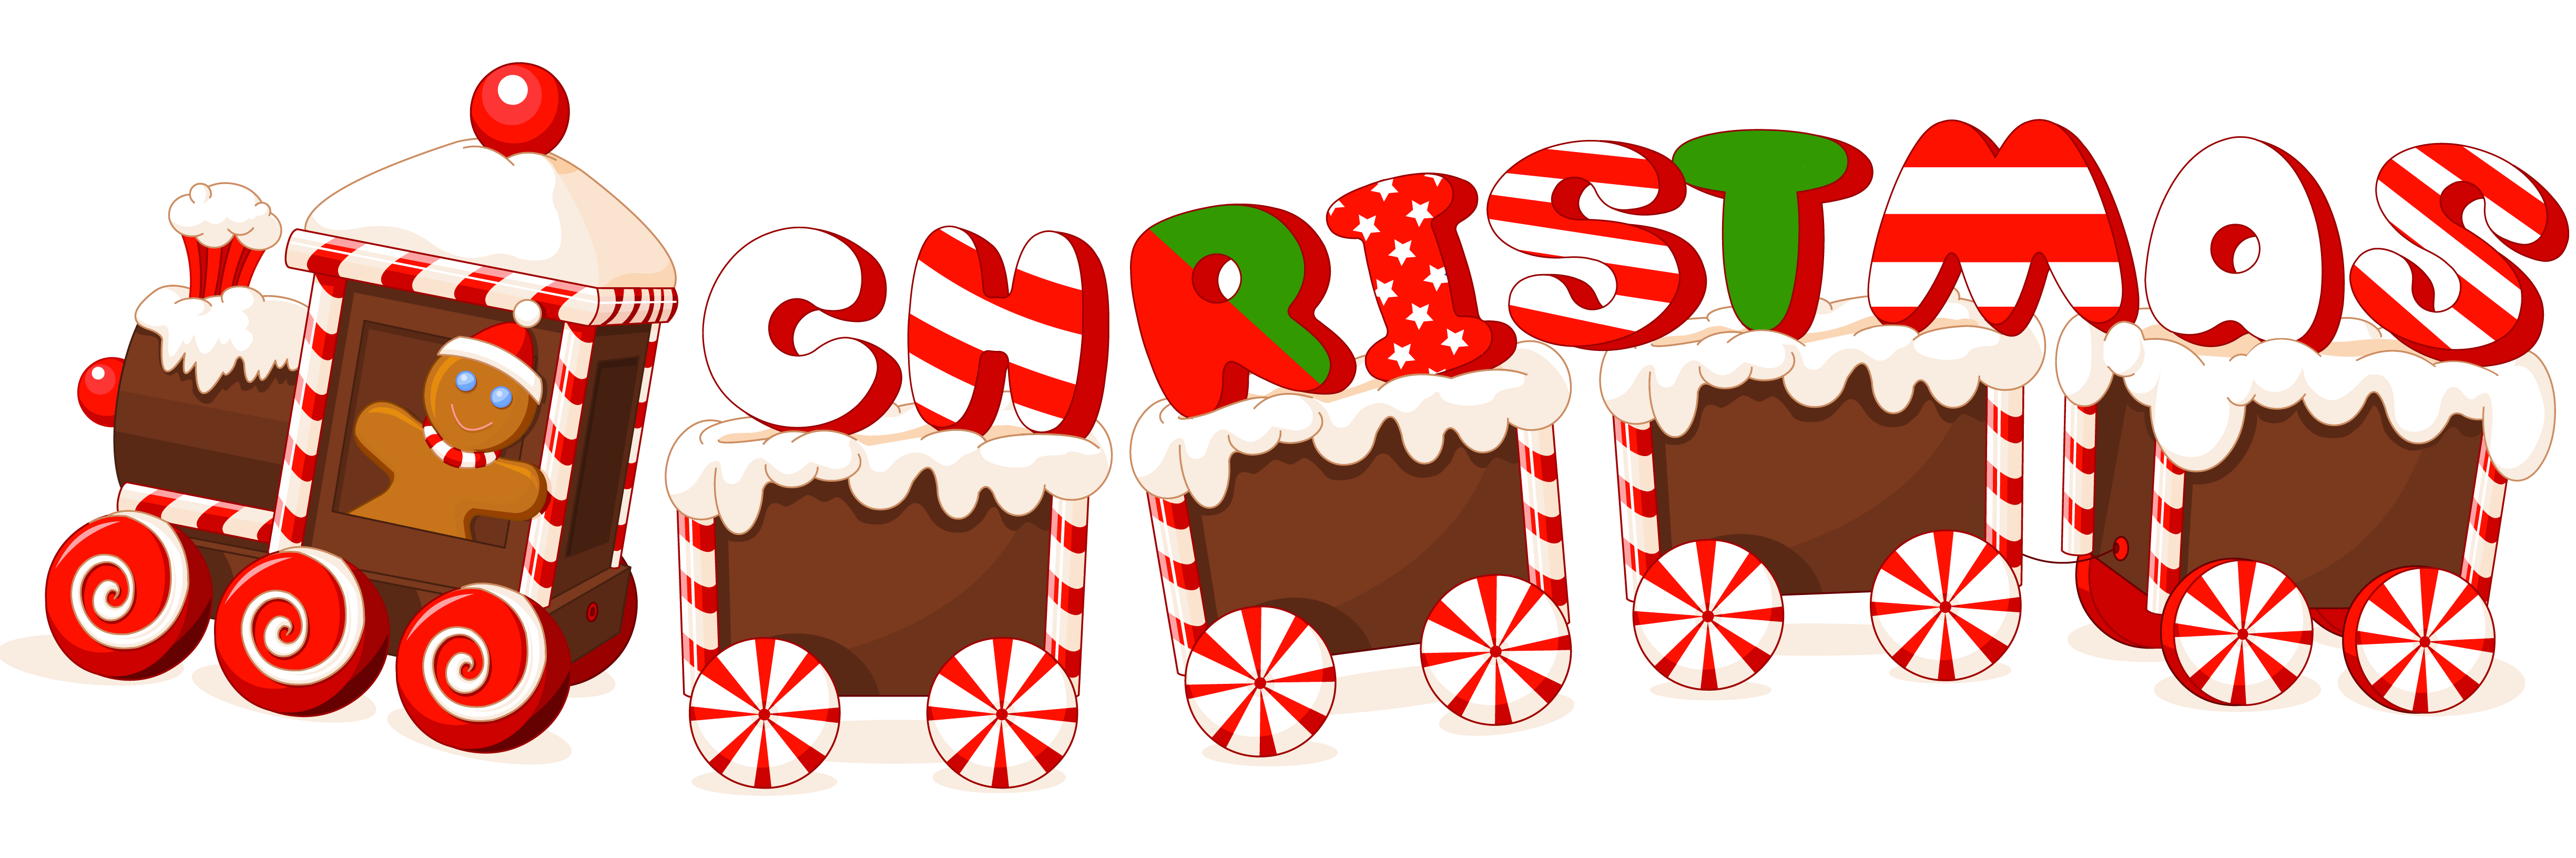 free clip art christmas candy - photo #31